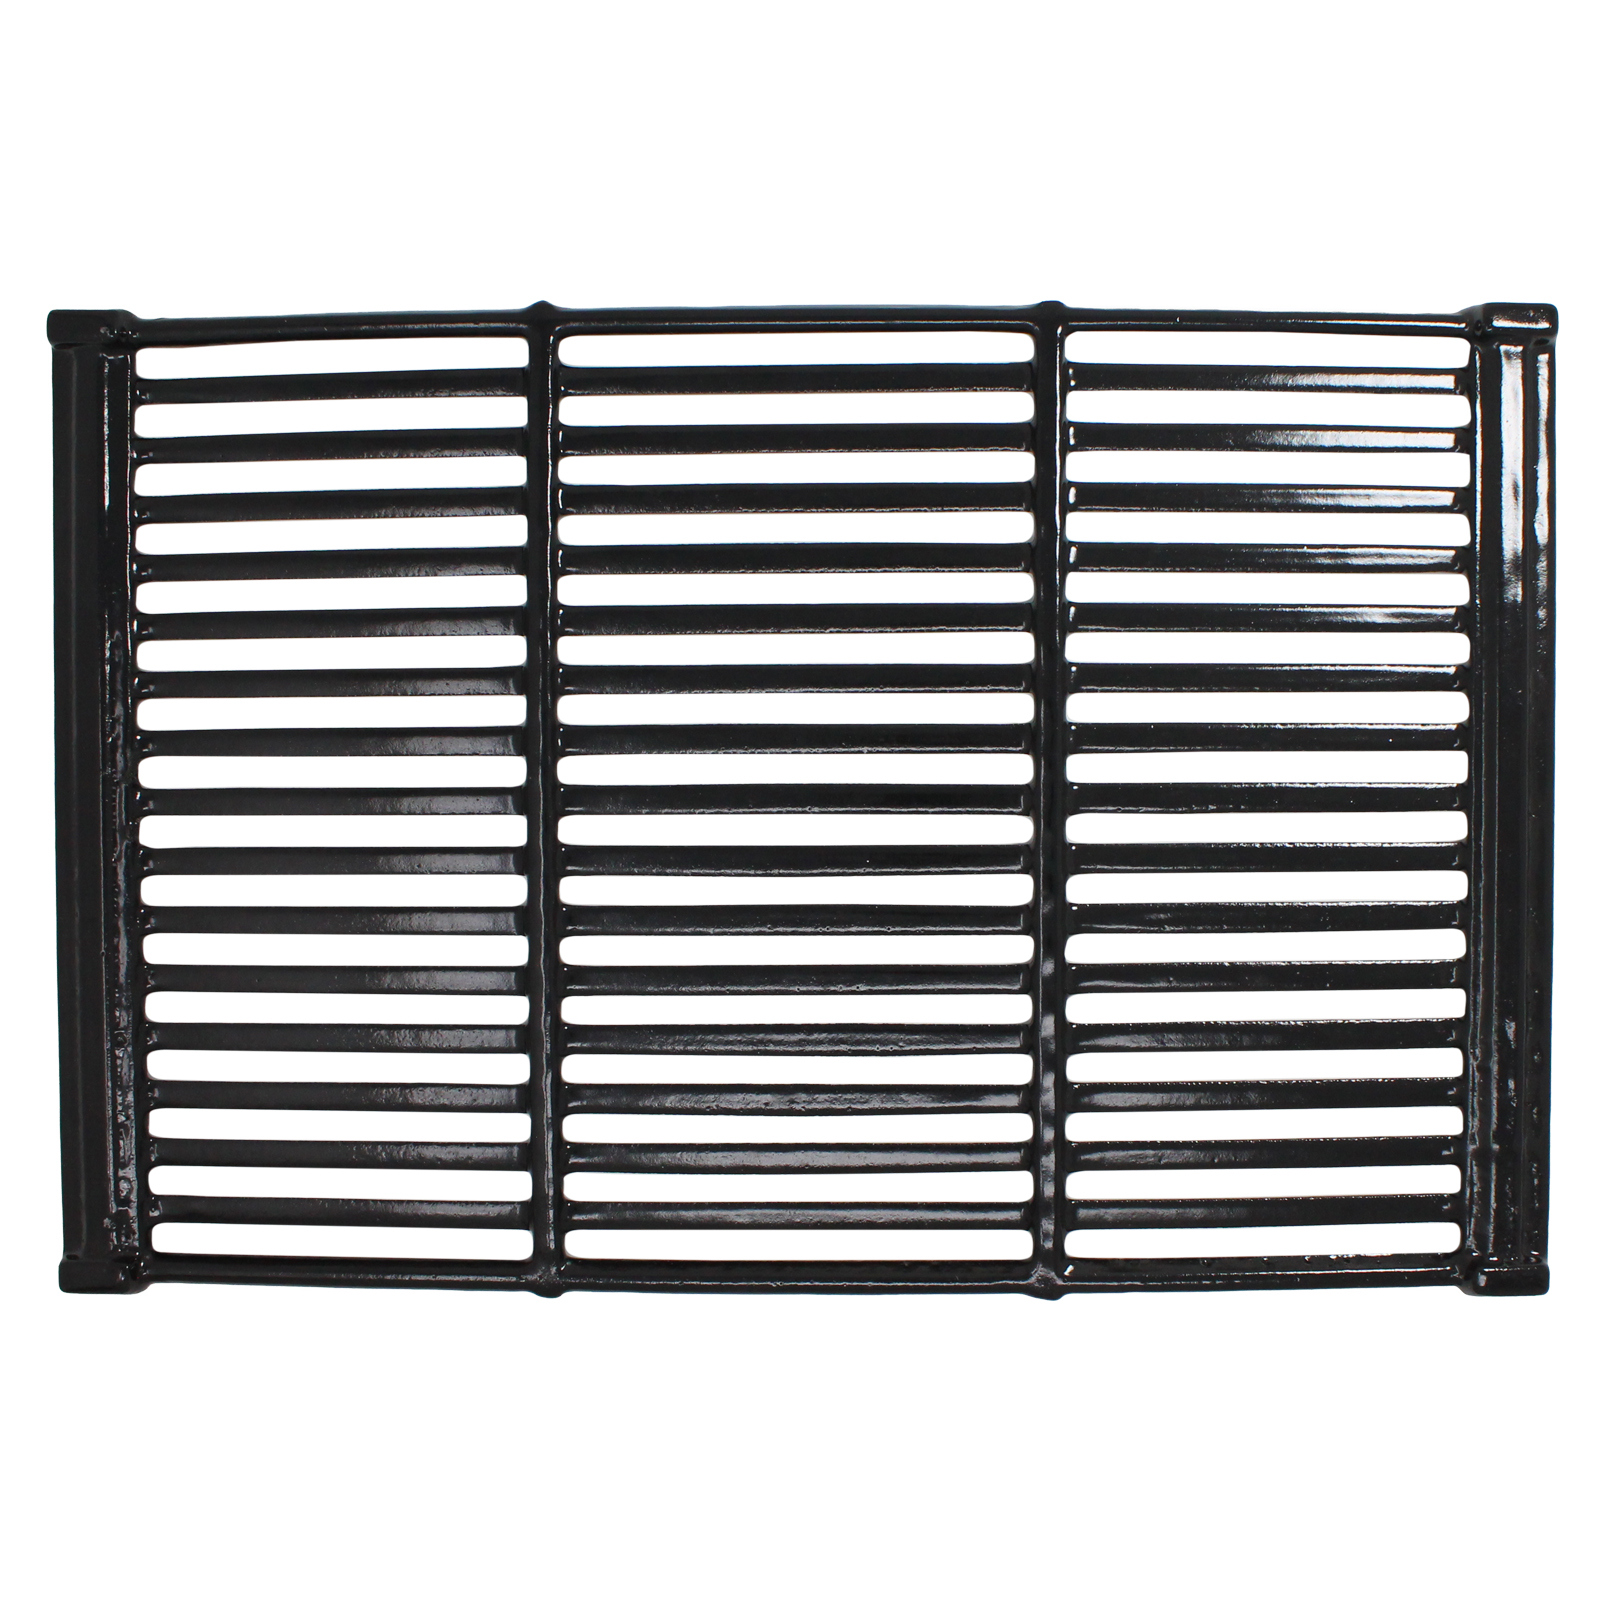 2-Pack BBQ Grill Cooking Grates Replacement Parts for Grill Pro 236464 - Compatible Barbeque Porcelain Enameled Cast Iron Grid 19" - image 2 of 4